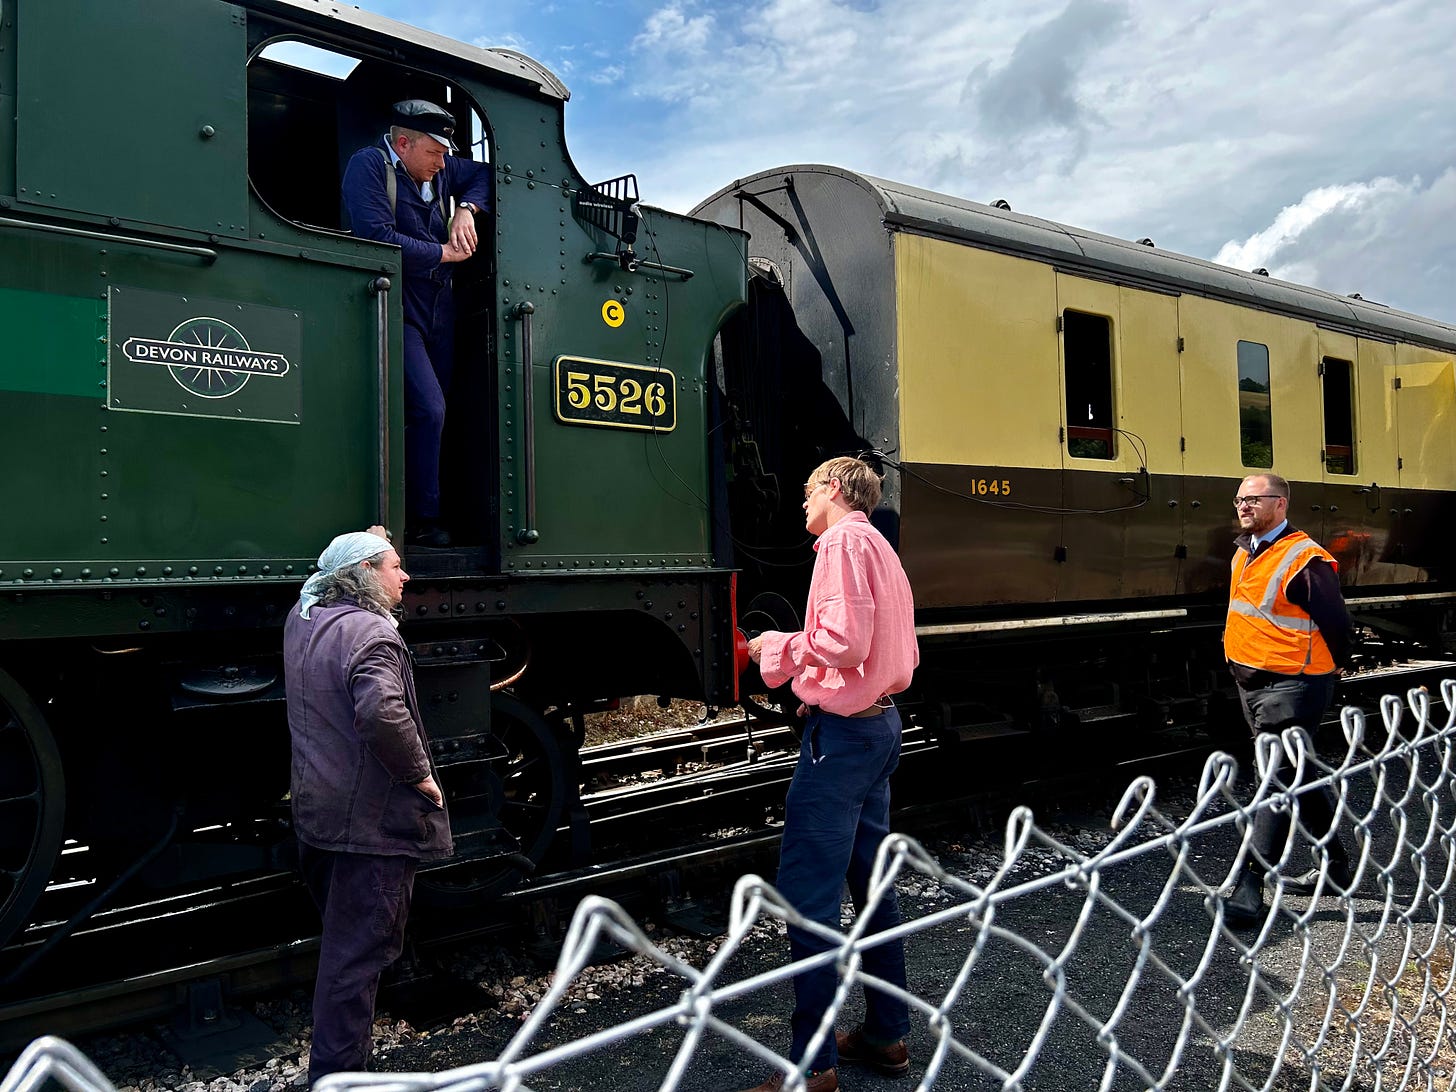 Kris Marshall on the set of a murder mystery episode of Beyond Paradise, a BBC drama. Being filmed at South Devon Railway on a train hauled by GWR 5562. Image: Roland's Travels